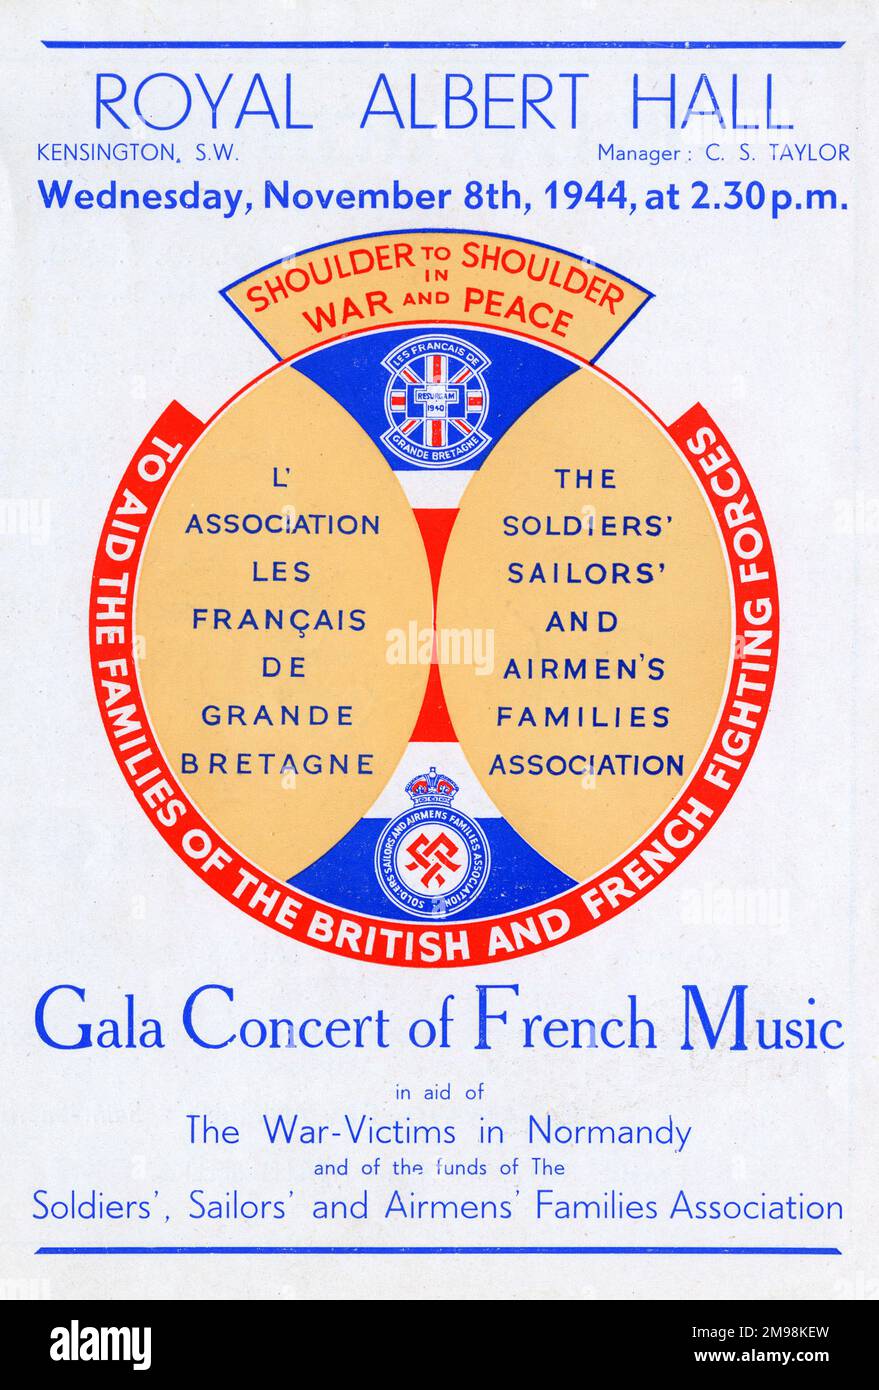 Programme cover, Gala Concert of French Music in aid of the war victims in Normandy, and of the funds of the Soldiers', Sailors' and Airmen's Families Association, at the Royal Albert Hall, Kensington, SW London, on 8 November 1944 at 2.30pm.  The programme included the French and British national anthems, and items by Gounod, Bizet, Saint-Saens, Duparc (vocal soloist Maggie Teyte) and Franck, with Sir Adrian Boult conducting the London Symphony Orchestra (leader George Stratton). The two pianists were Cyril Smith and Phyllis Sellick, and the organist was Arnold Greir. Stock Photo